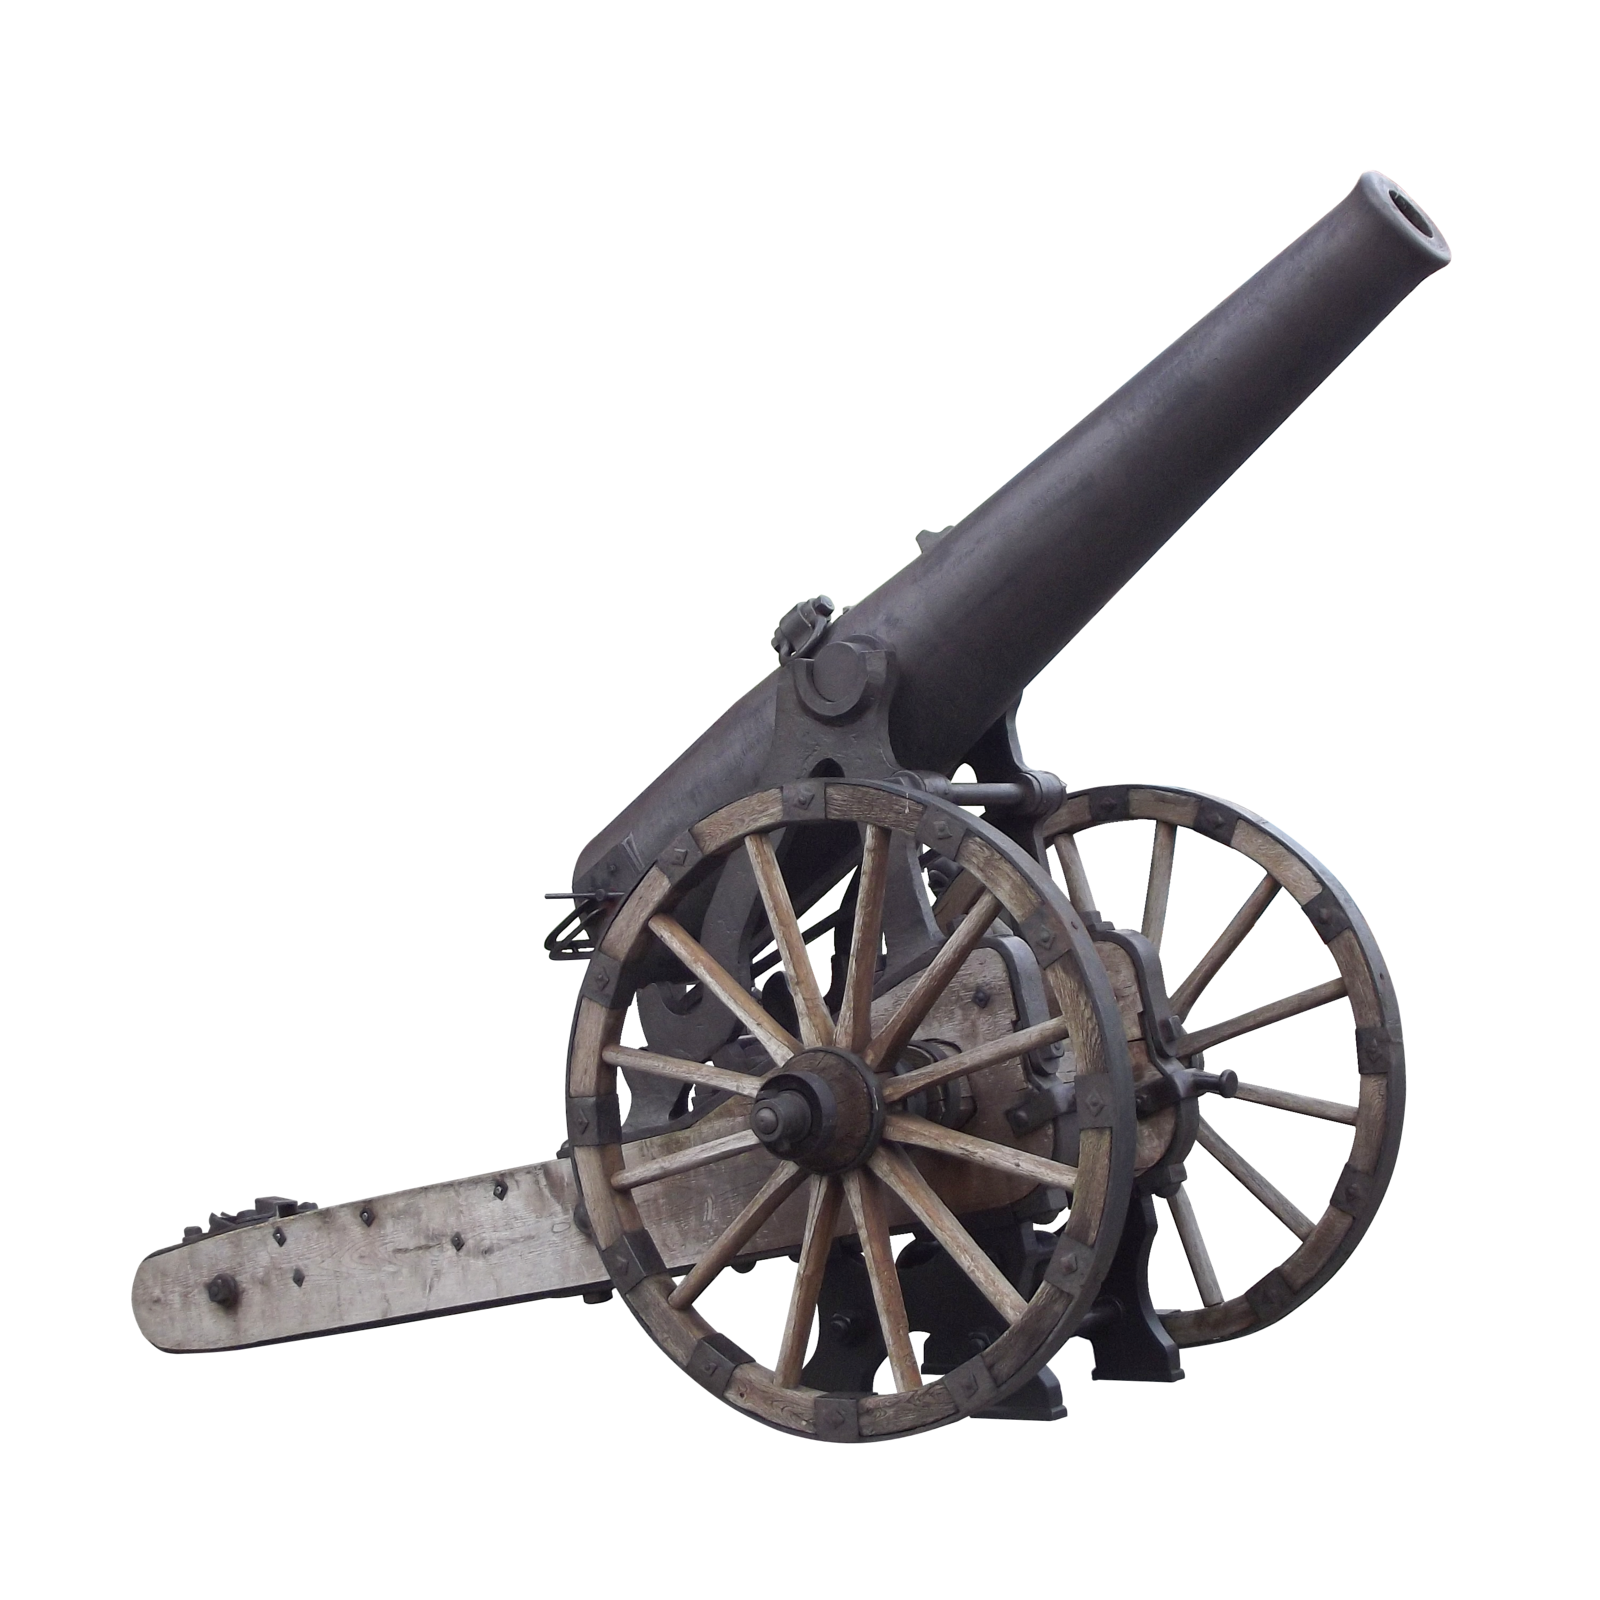 Cannon Download PNG Image